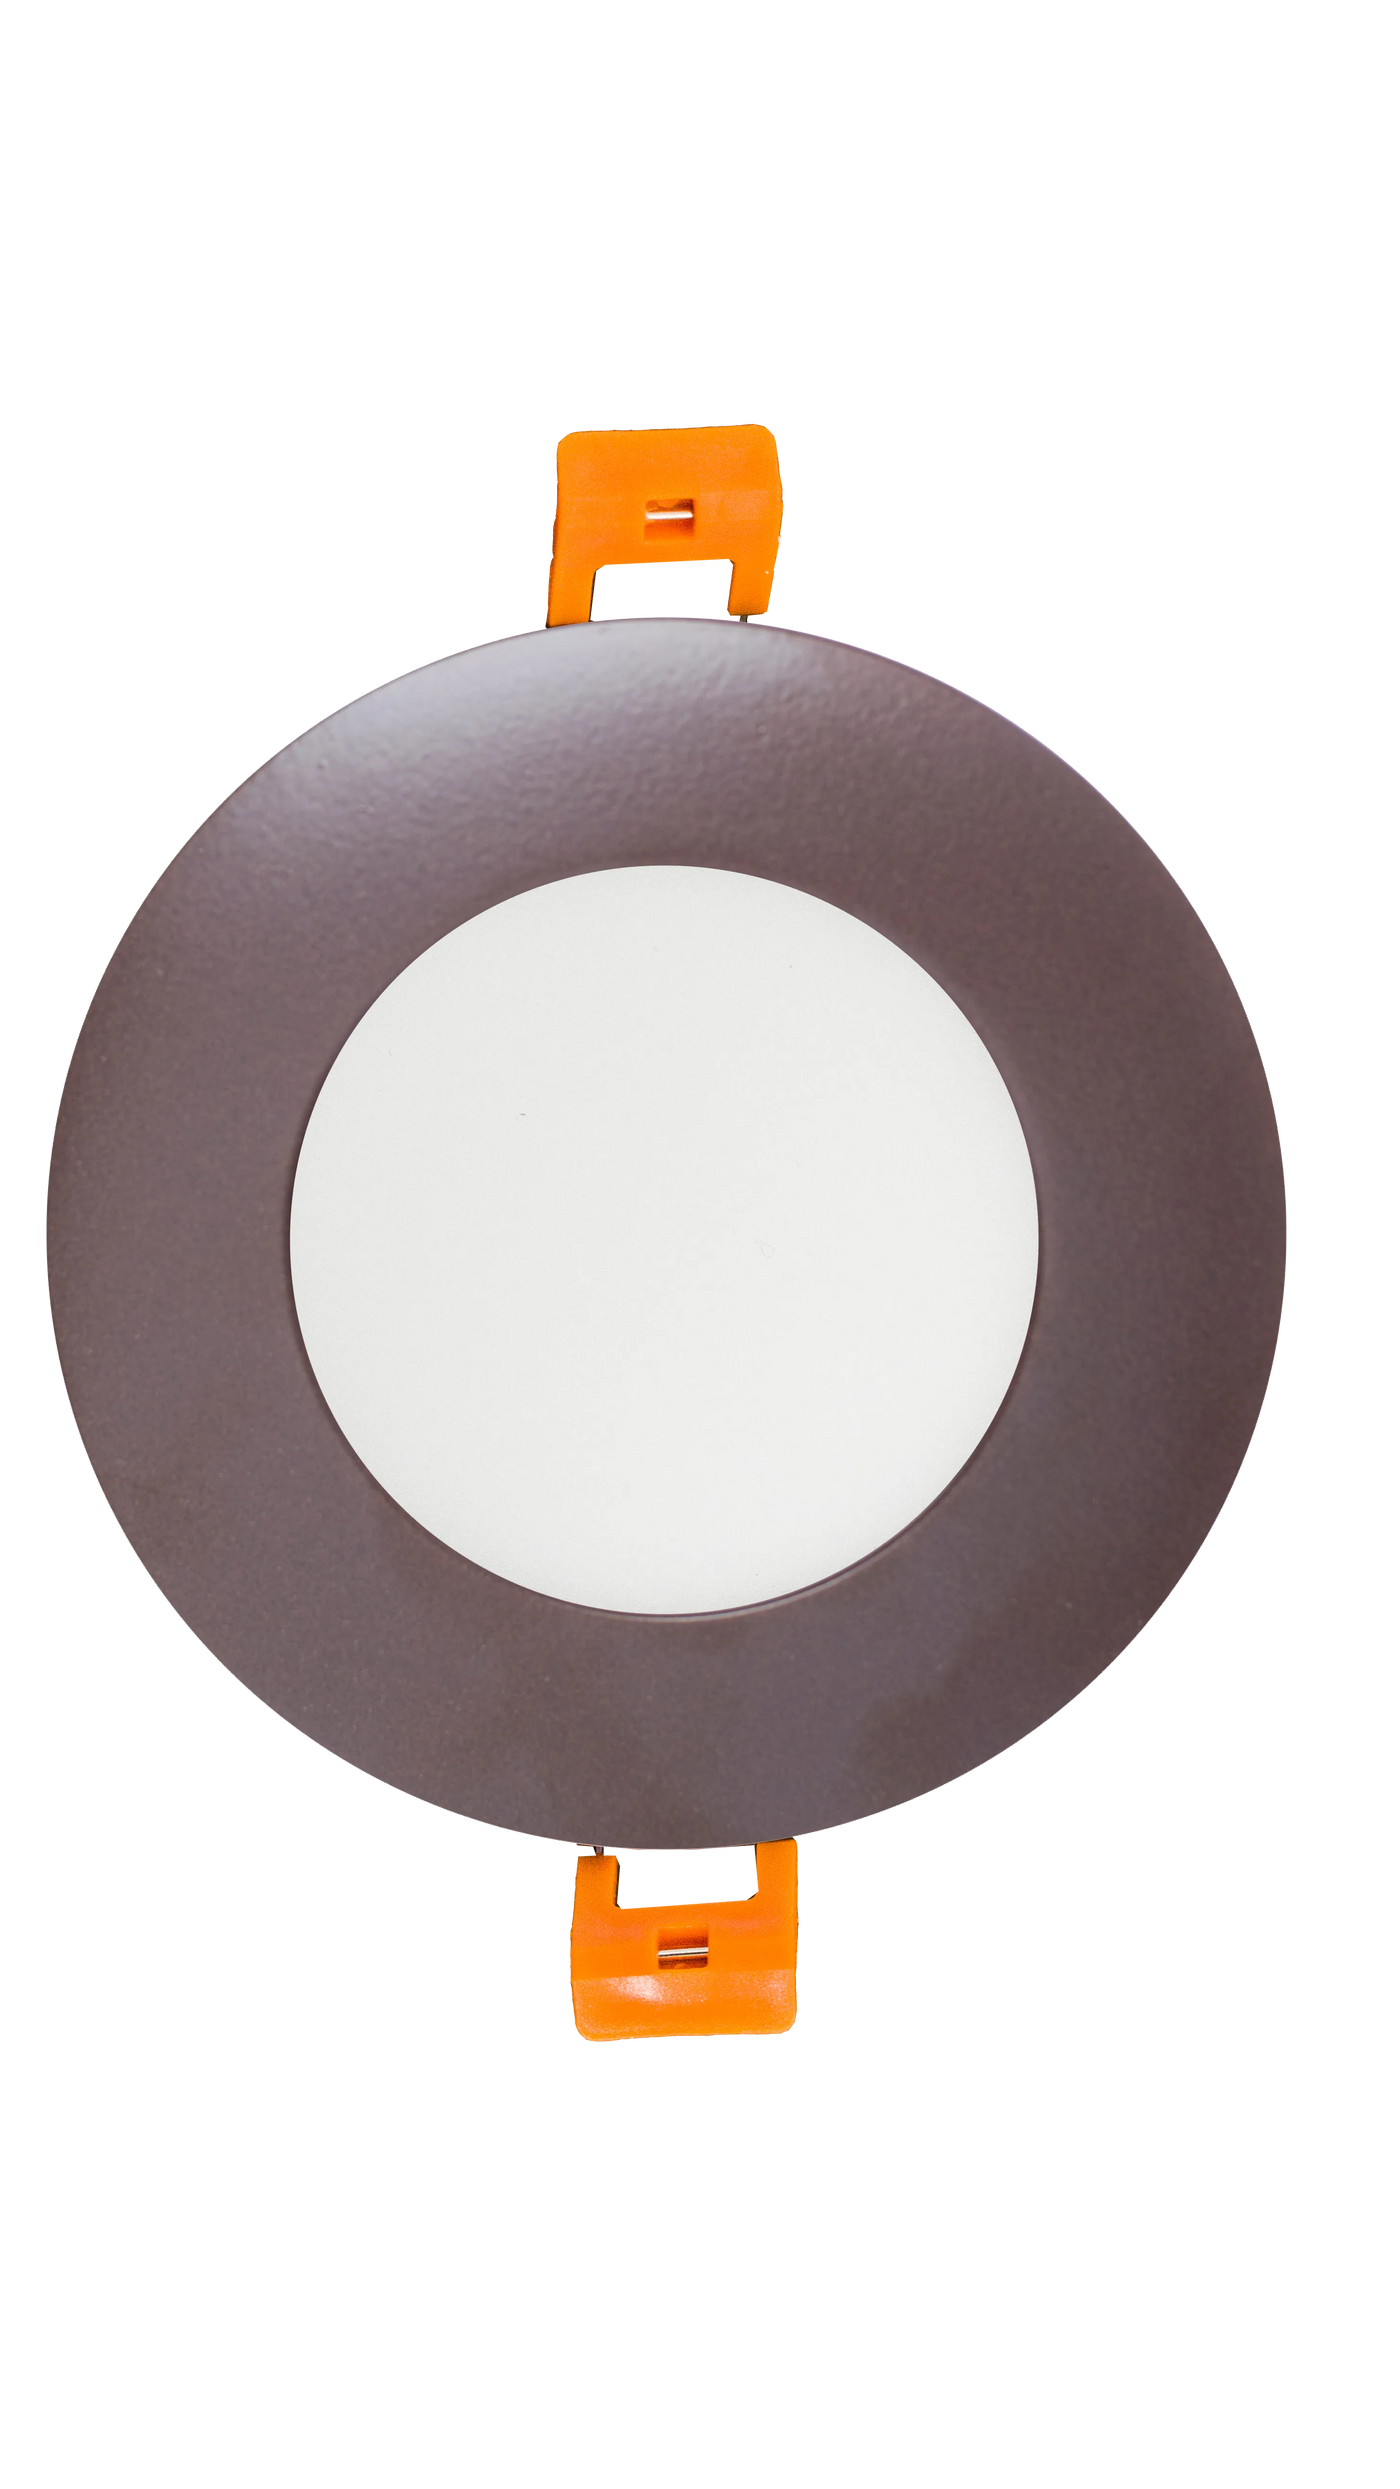 4" LED ROUND ULTRA SLIM RECESSED LIGHT, 9W, 630 LUMENS, CCT SELECTABLE, 120V, OIL-RUBBED BRONZE